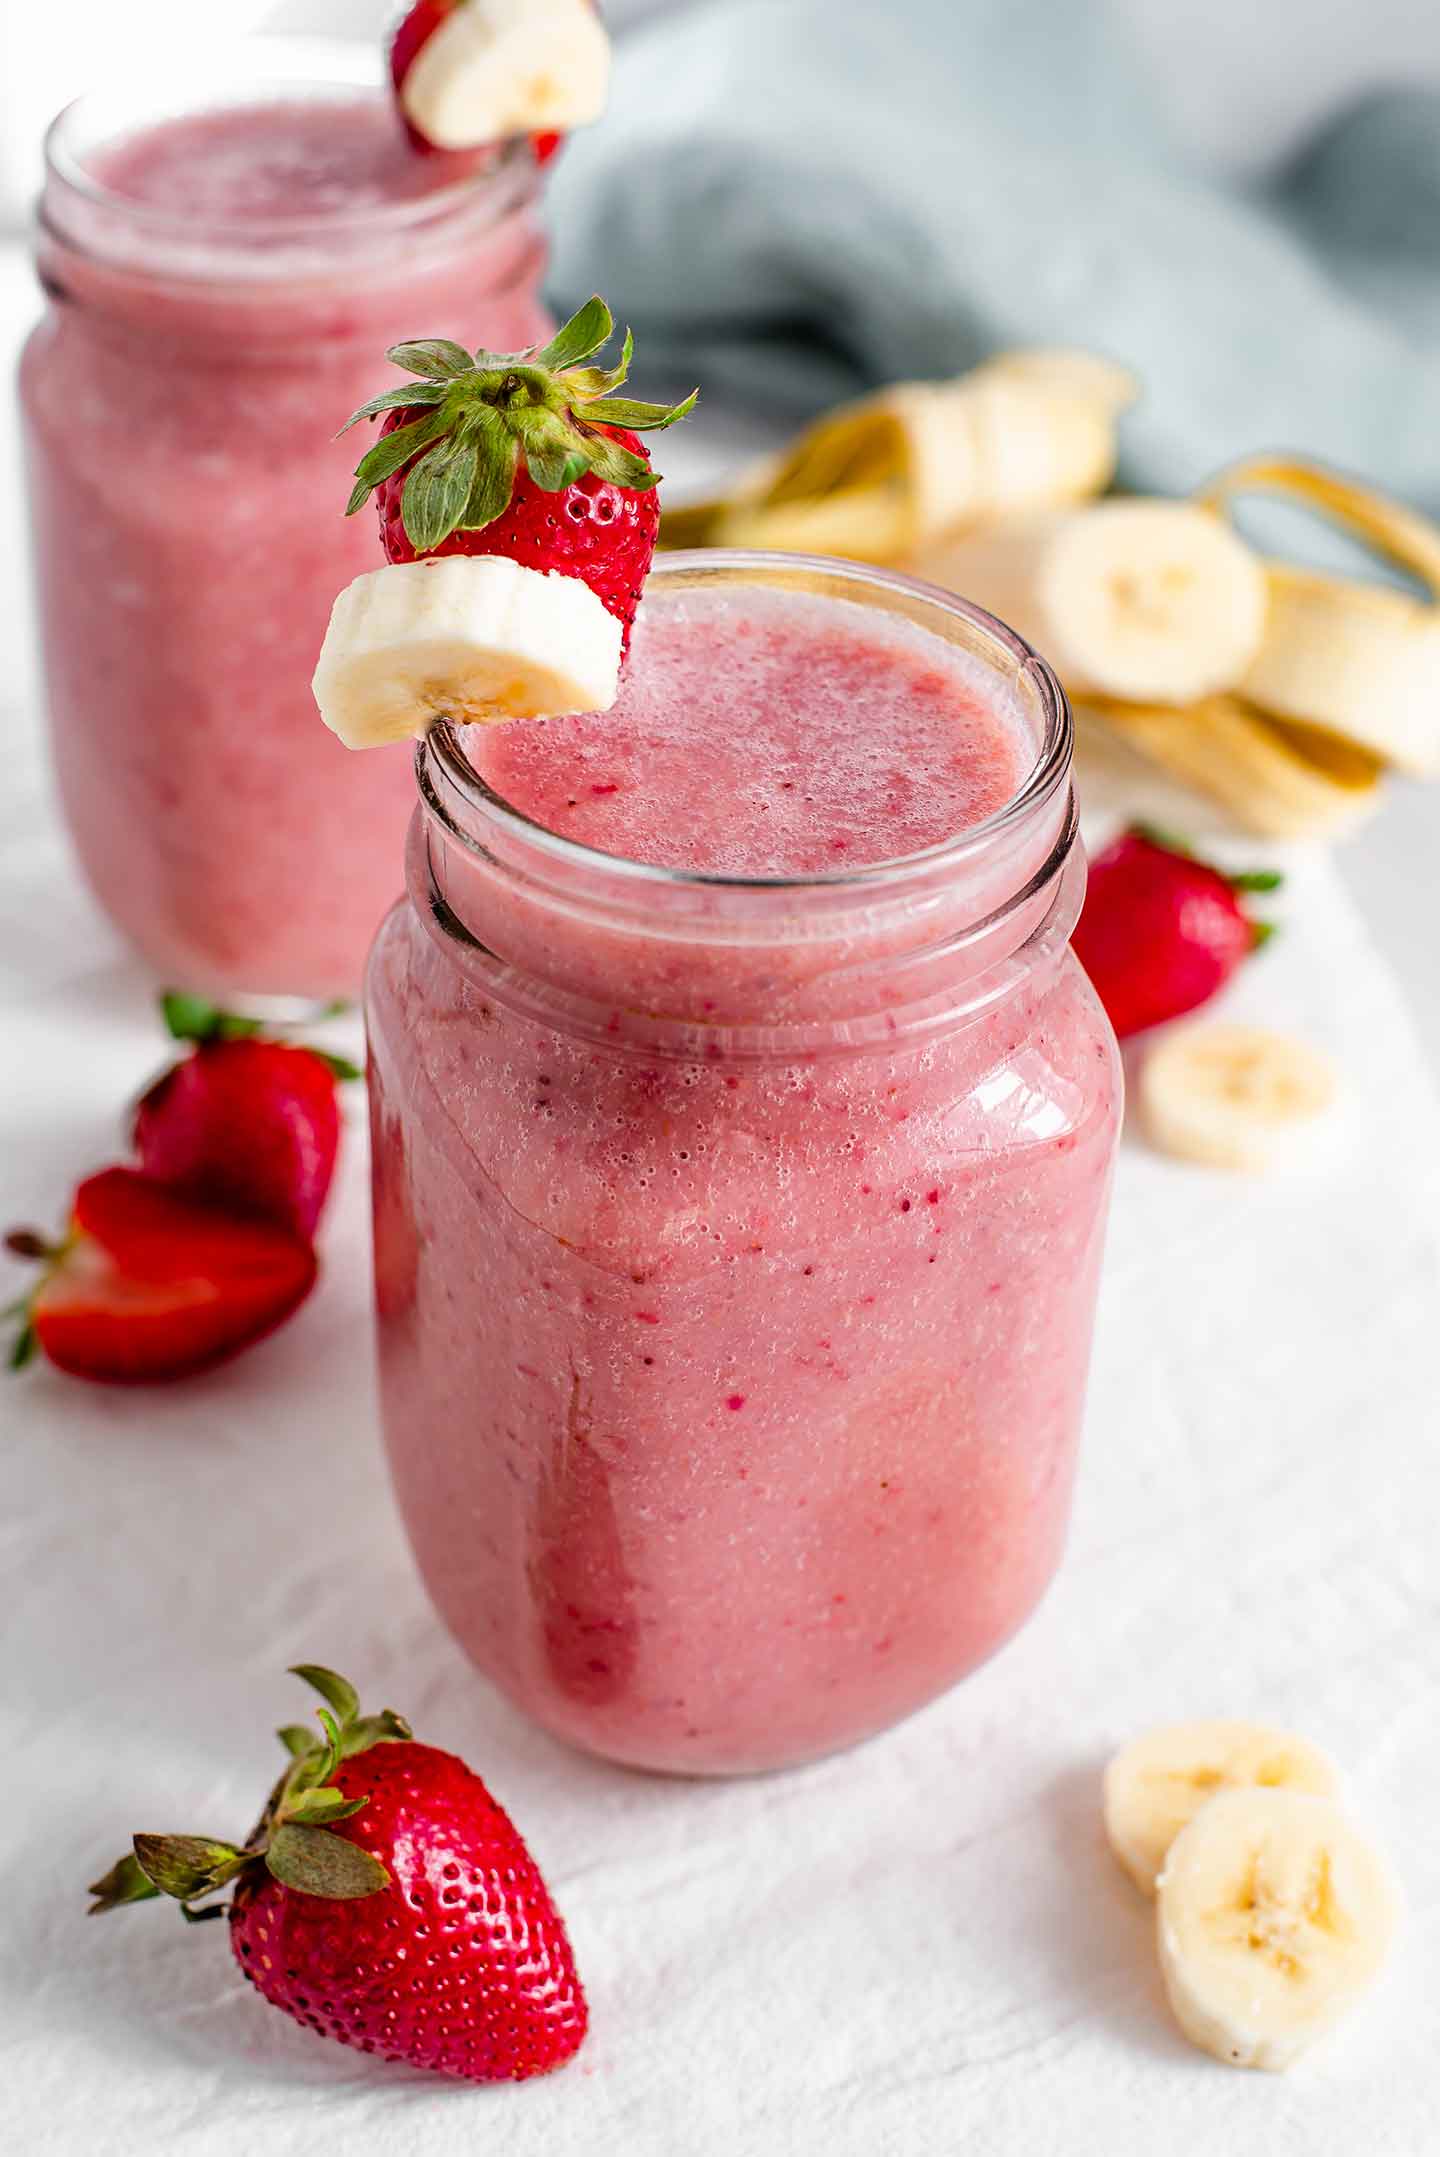 Side view of two strawberry banana smoothies. Strawberries and banana slices lay on a white tray.